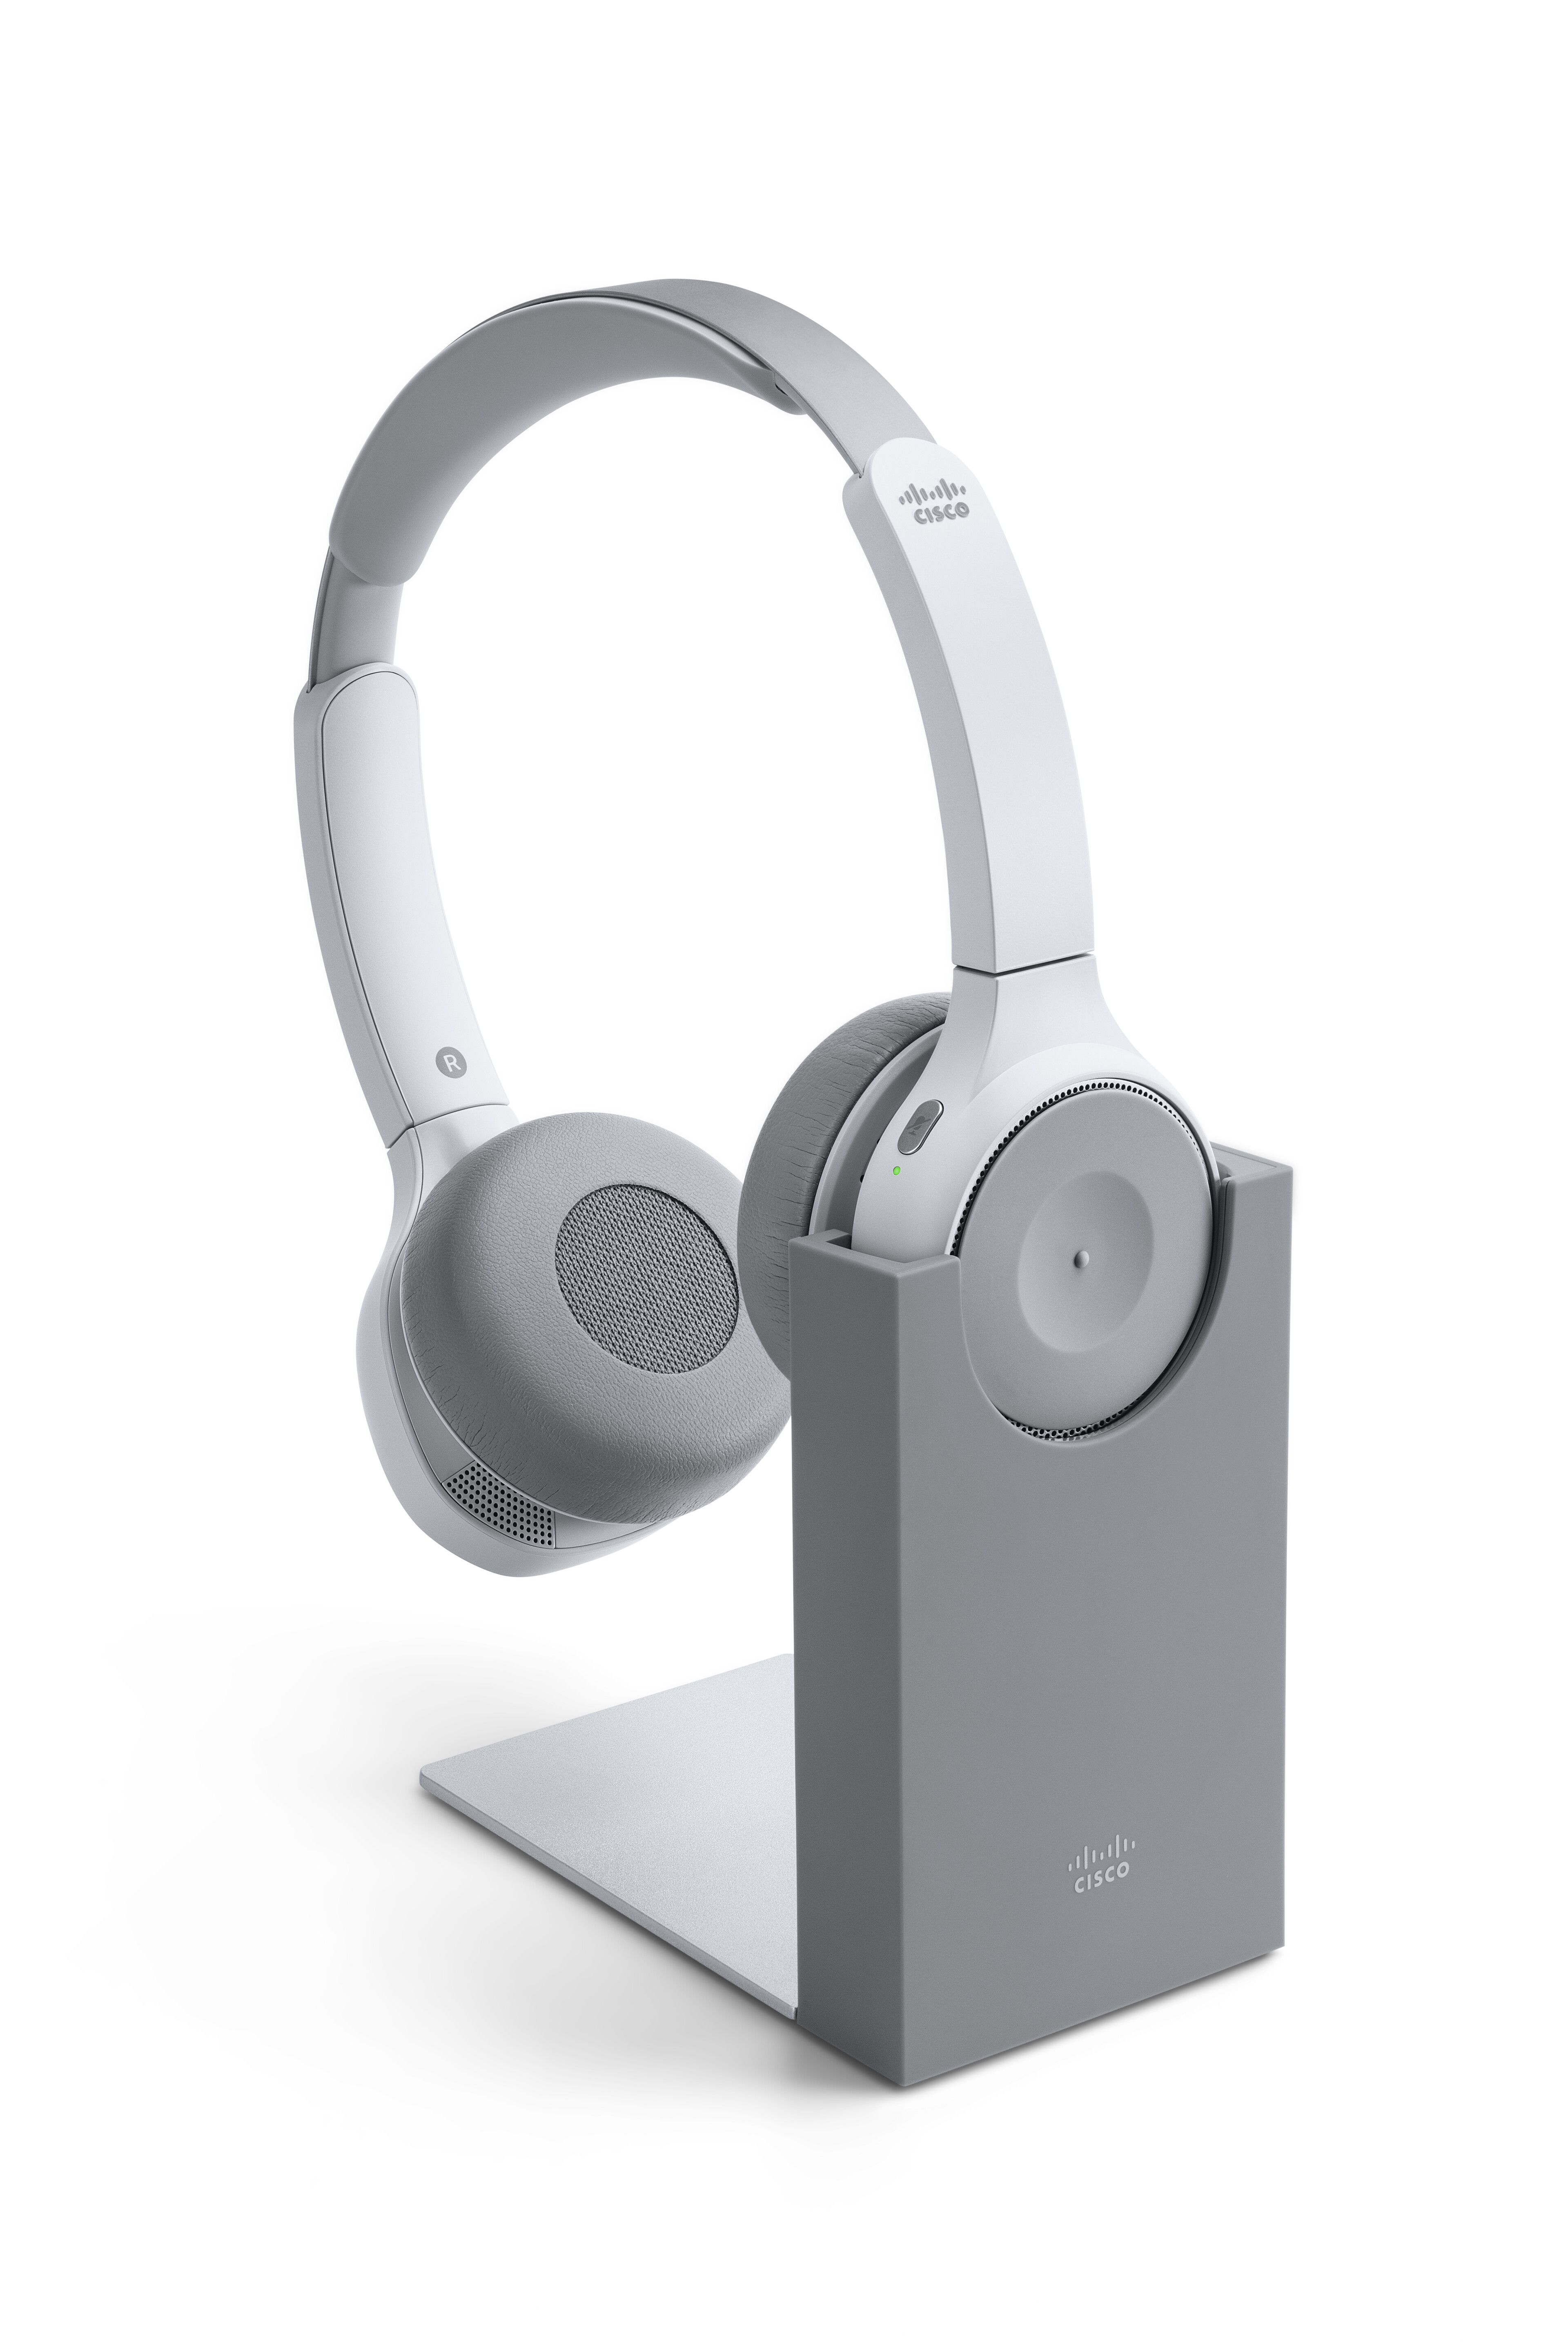 The Cisco Headset 730 in platinum, shown in its charging stand